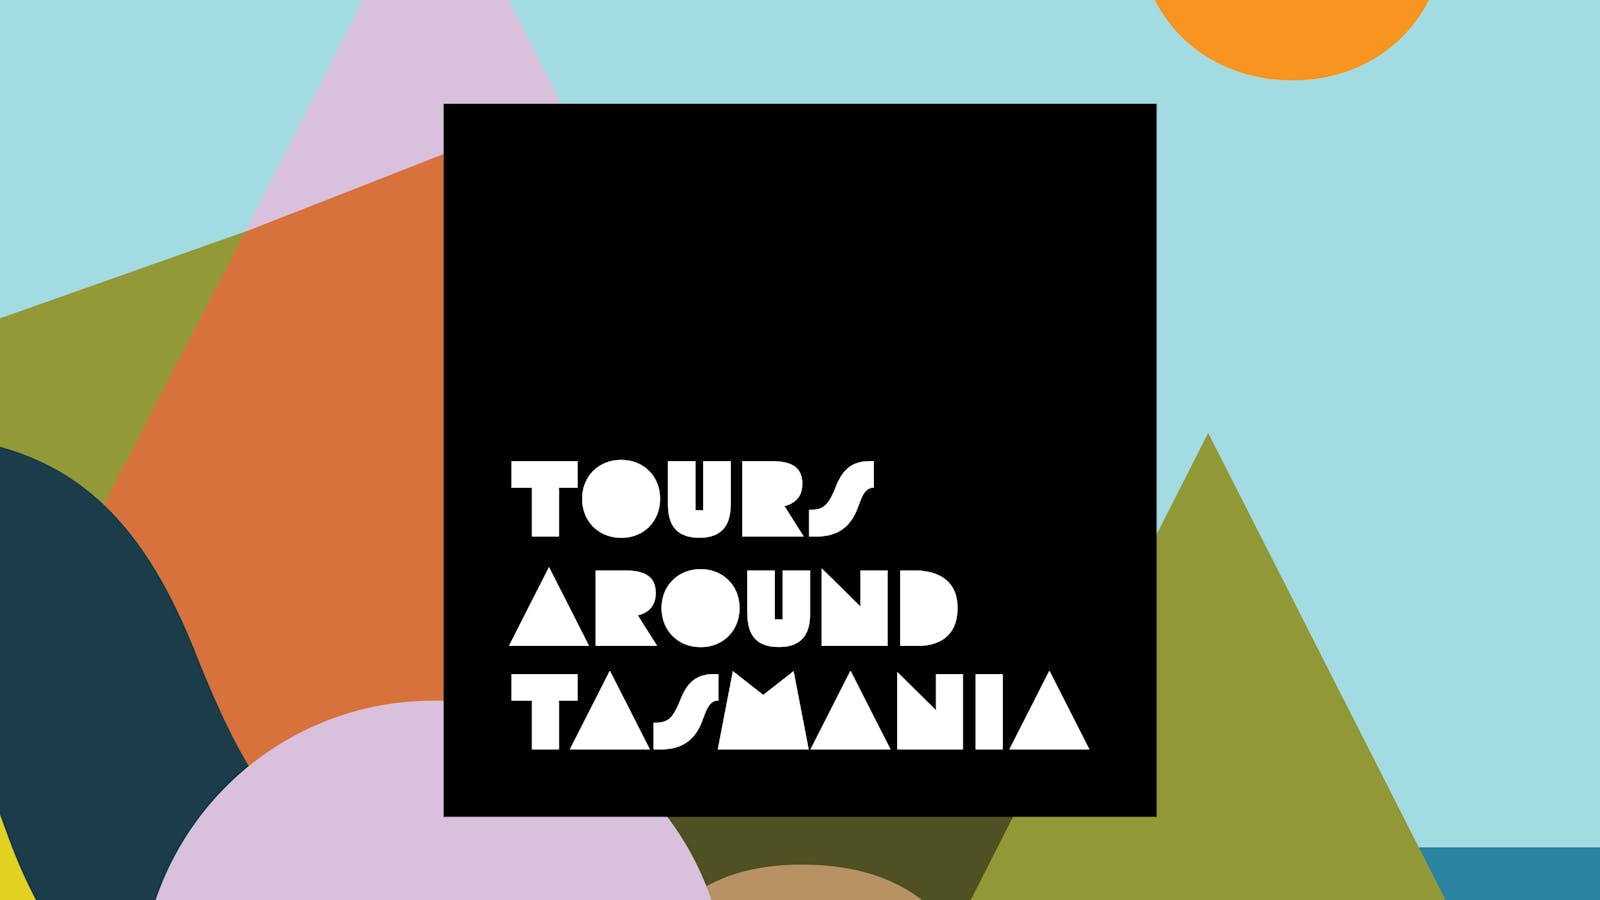 We want you to experience Tasmania through your passion!